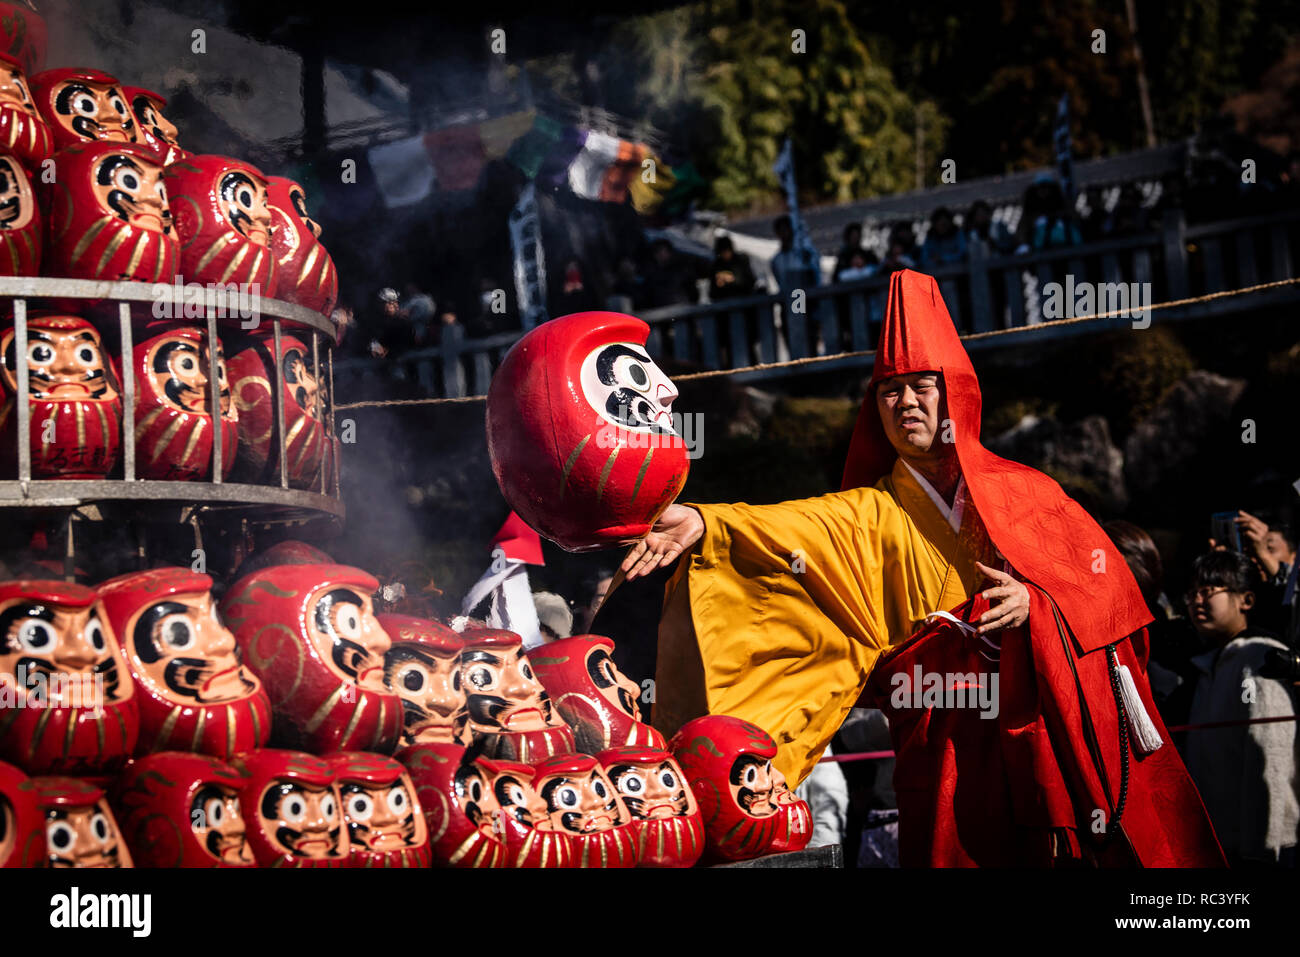 JANUARY 13, 2019 - A Buddhist monk tosses a Daruma doll on to a stack of burning dolls during a daruma kuy ceremony at Dairyuji, a Buddhist temple in Gifu, Japan. People burn 10,000 dolls from the previous year and buy new ones during the ceremony, one of the biggest of its kind in Japan. Daruma dolls typically symbolize goal setting, perseverance, and good luck. Credit: Ben Weller/AFLO/Alamy Live News Stock Photo